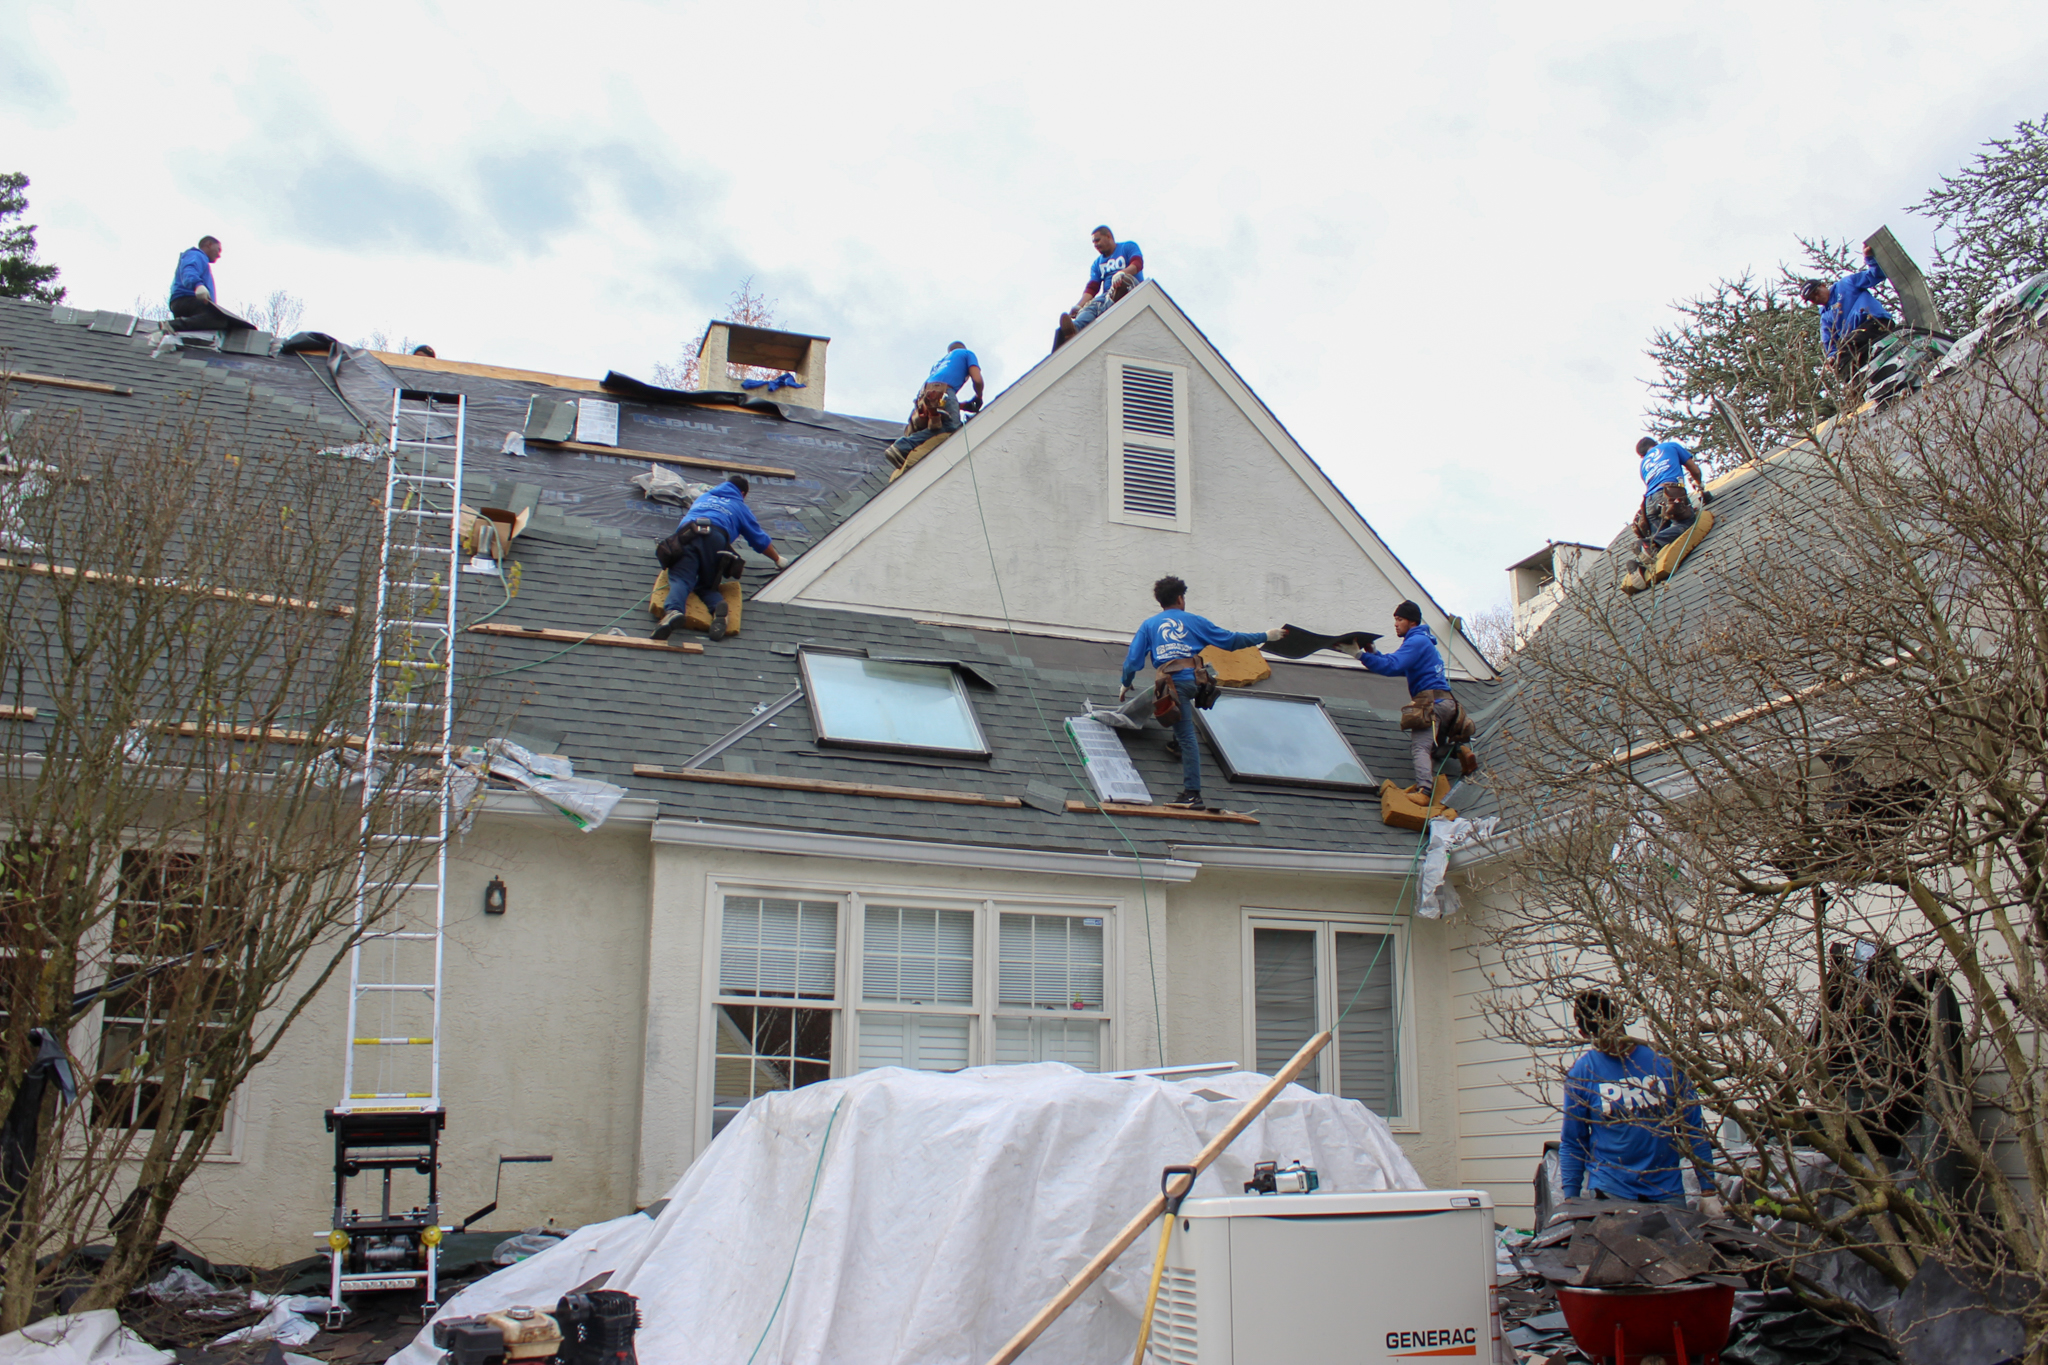 Skylight replacement with roof damage repair - Pro Storm Repair